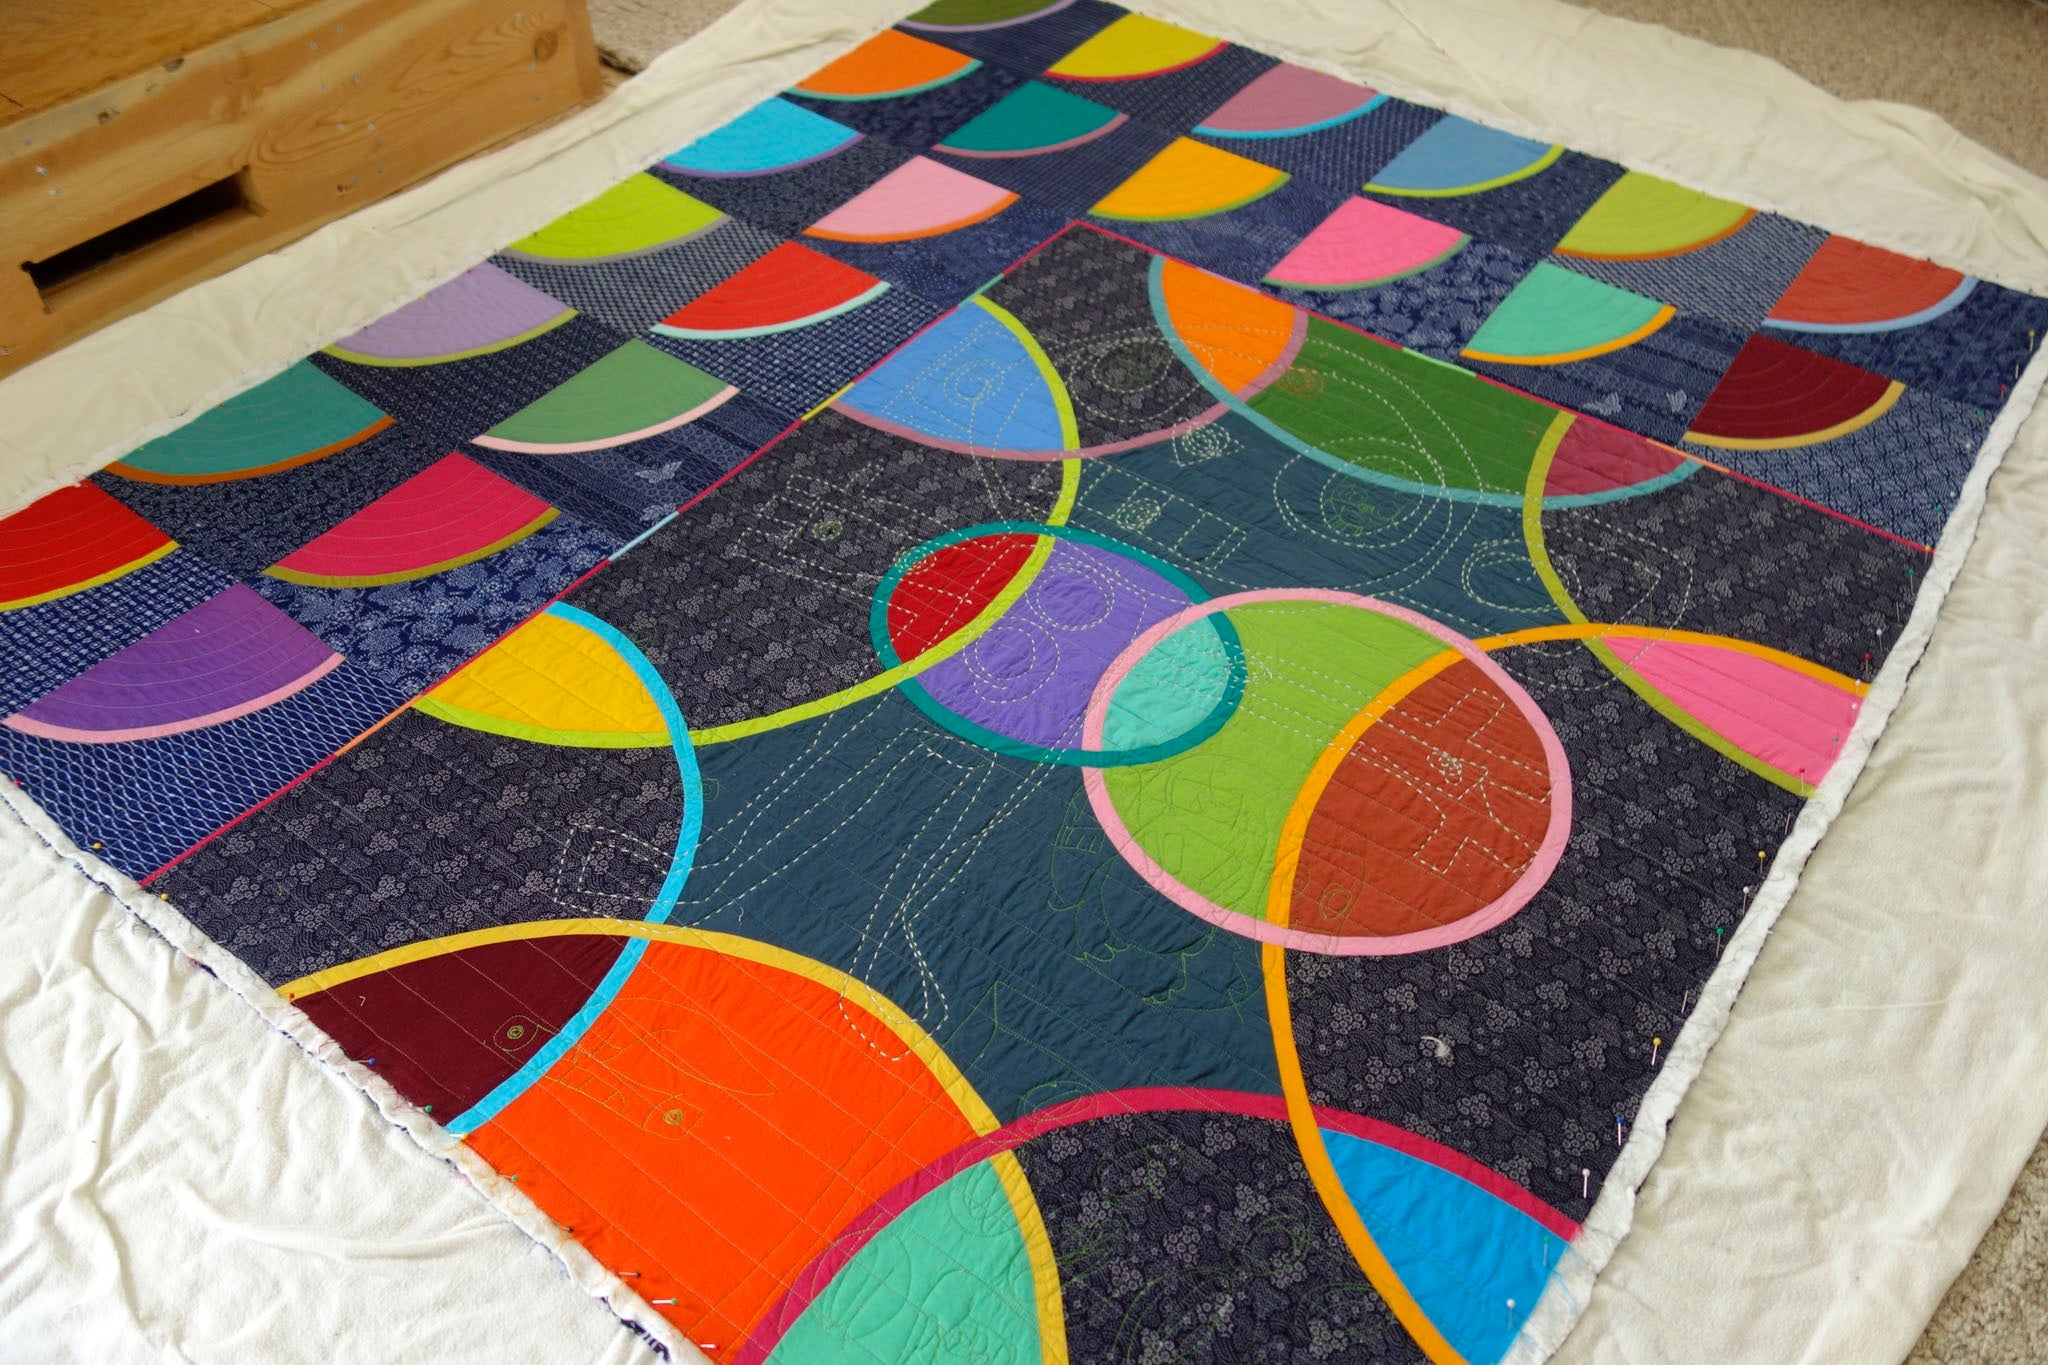 Watermelon From Mars, a quilt by Patricia Belyea, in process